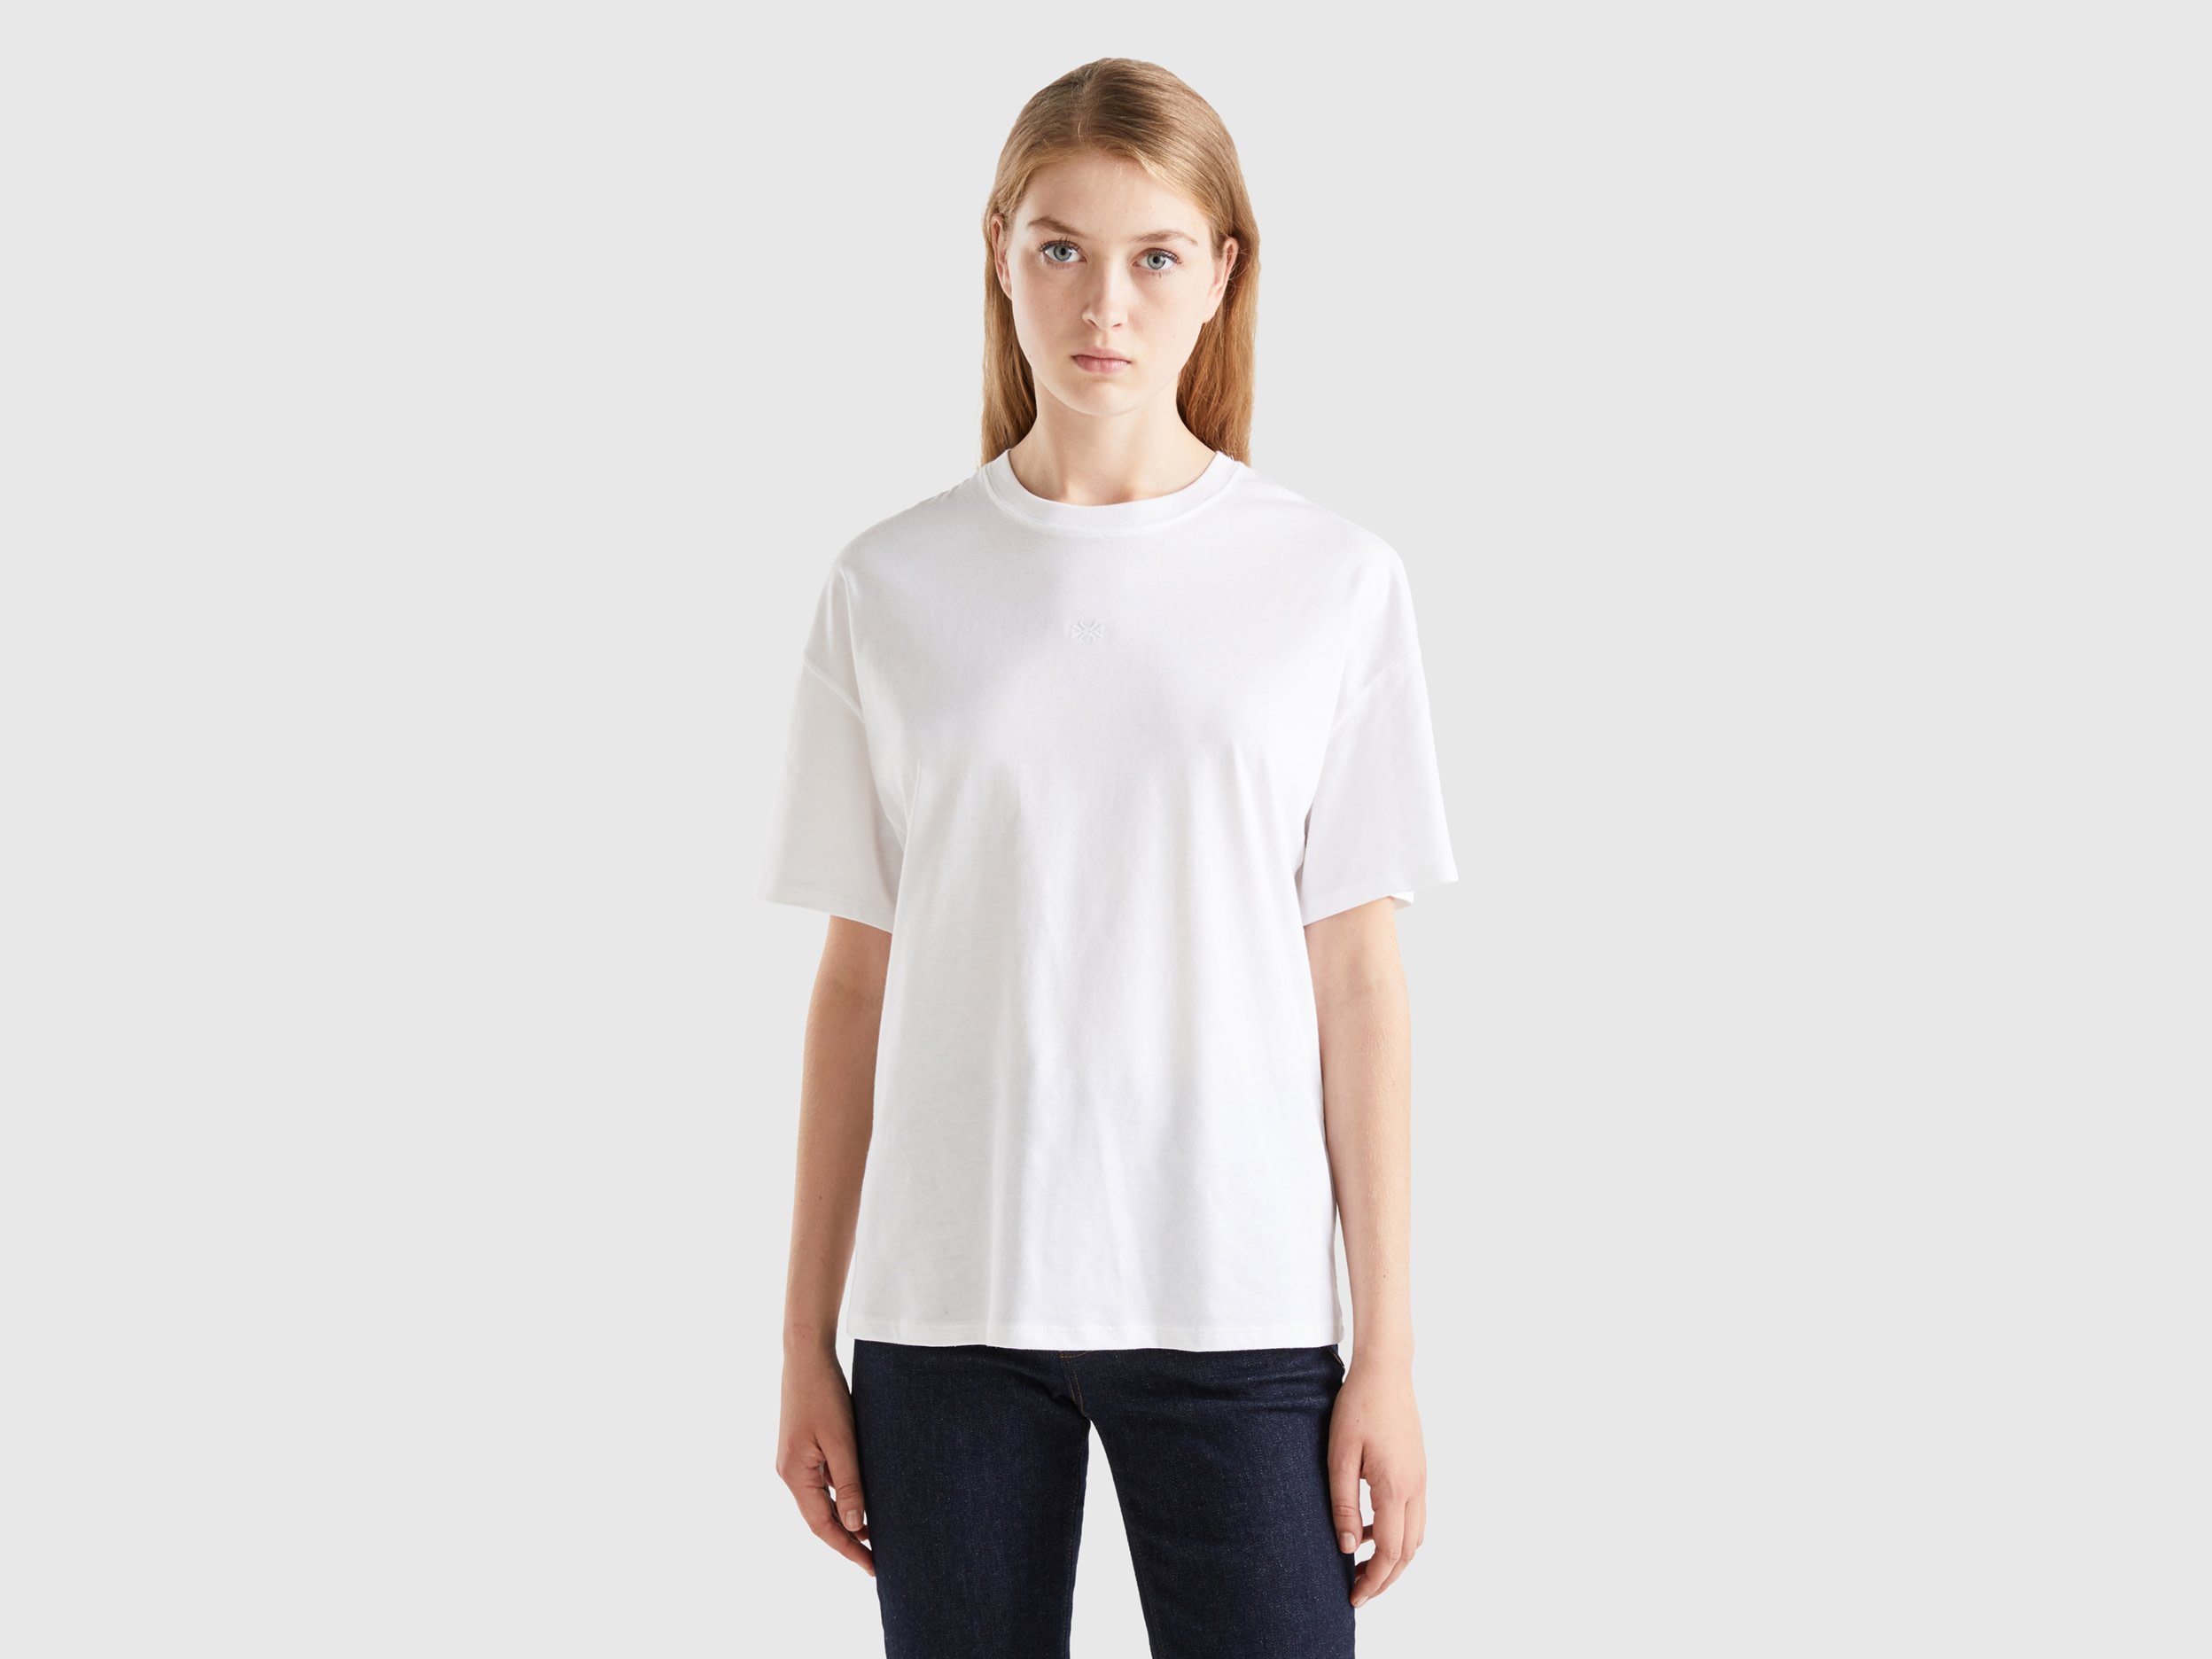 Benetton, T-shirt With Embroidered Logo, size M, White, Women